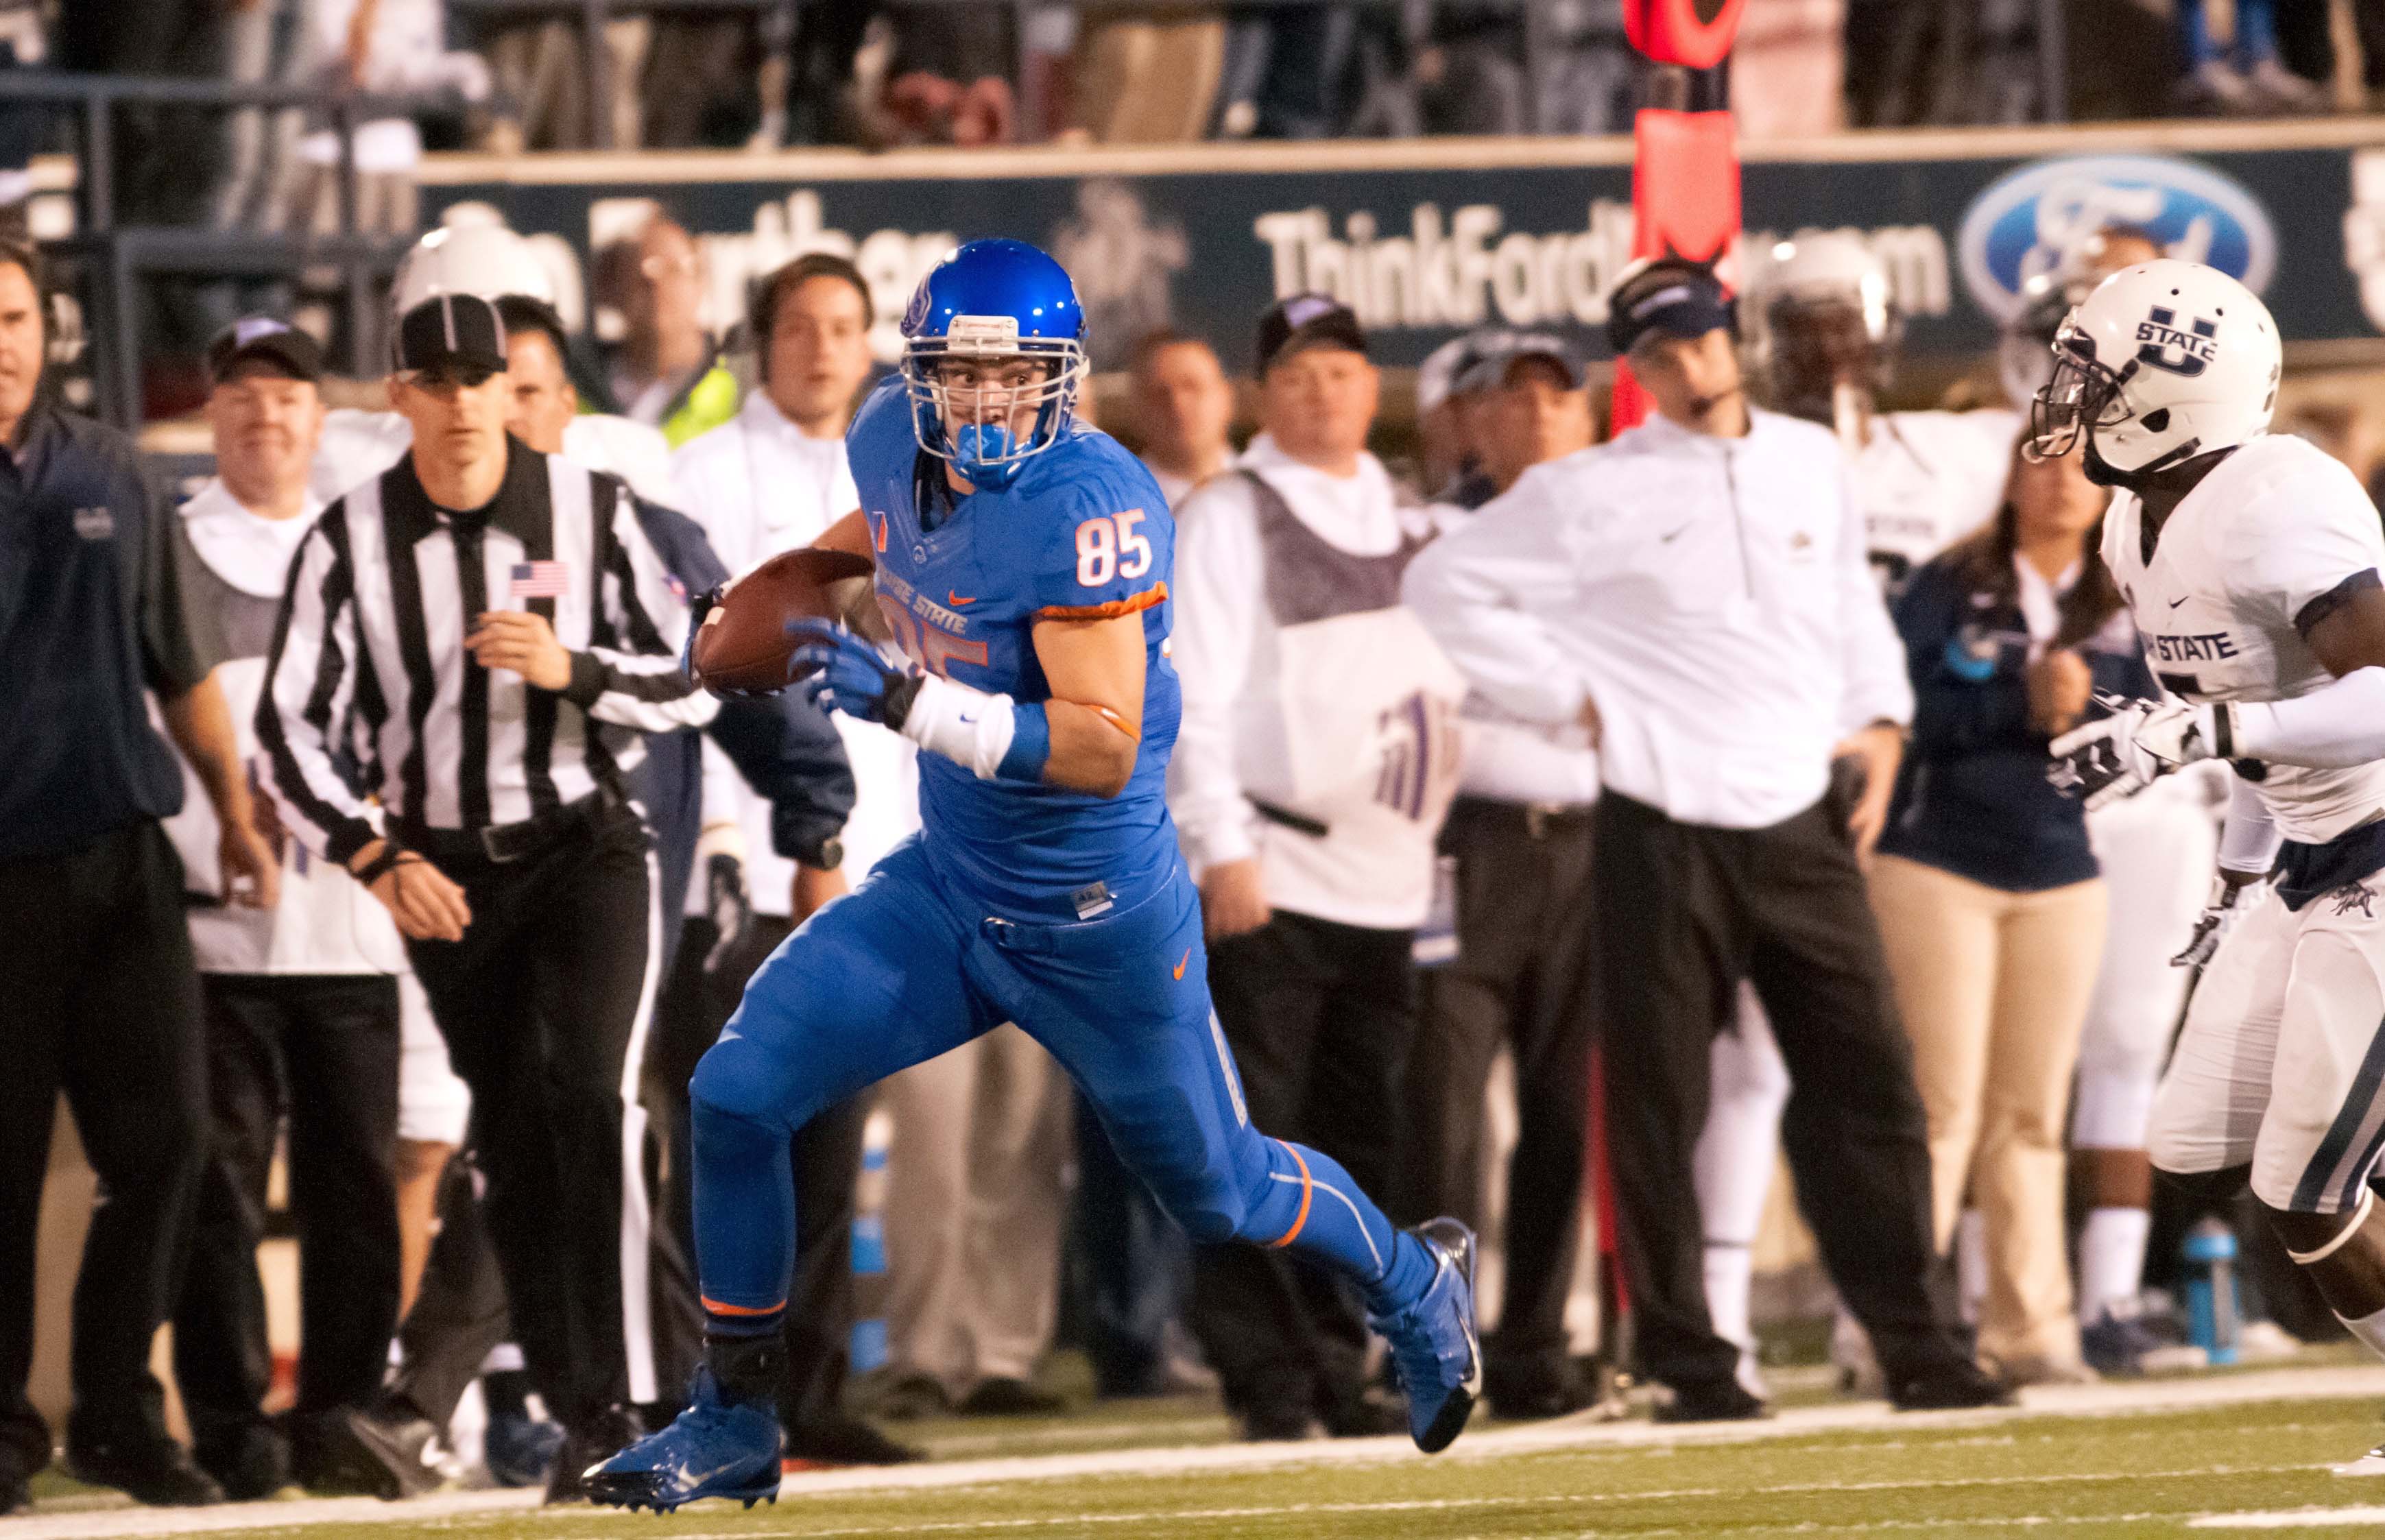 Dream come true: Boise State Broncos tight end Holden Huff is enjoying his visit to Japan with the Hosei University Tomahawks football team. | BOISE STATE UNIVERSITY